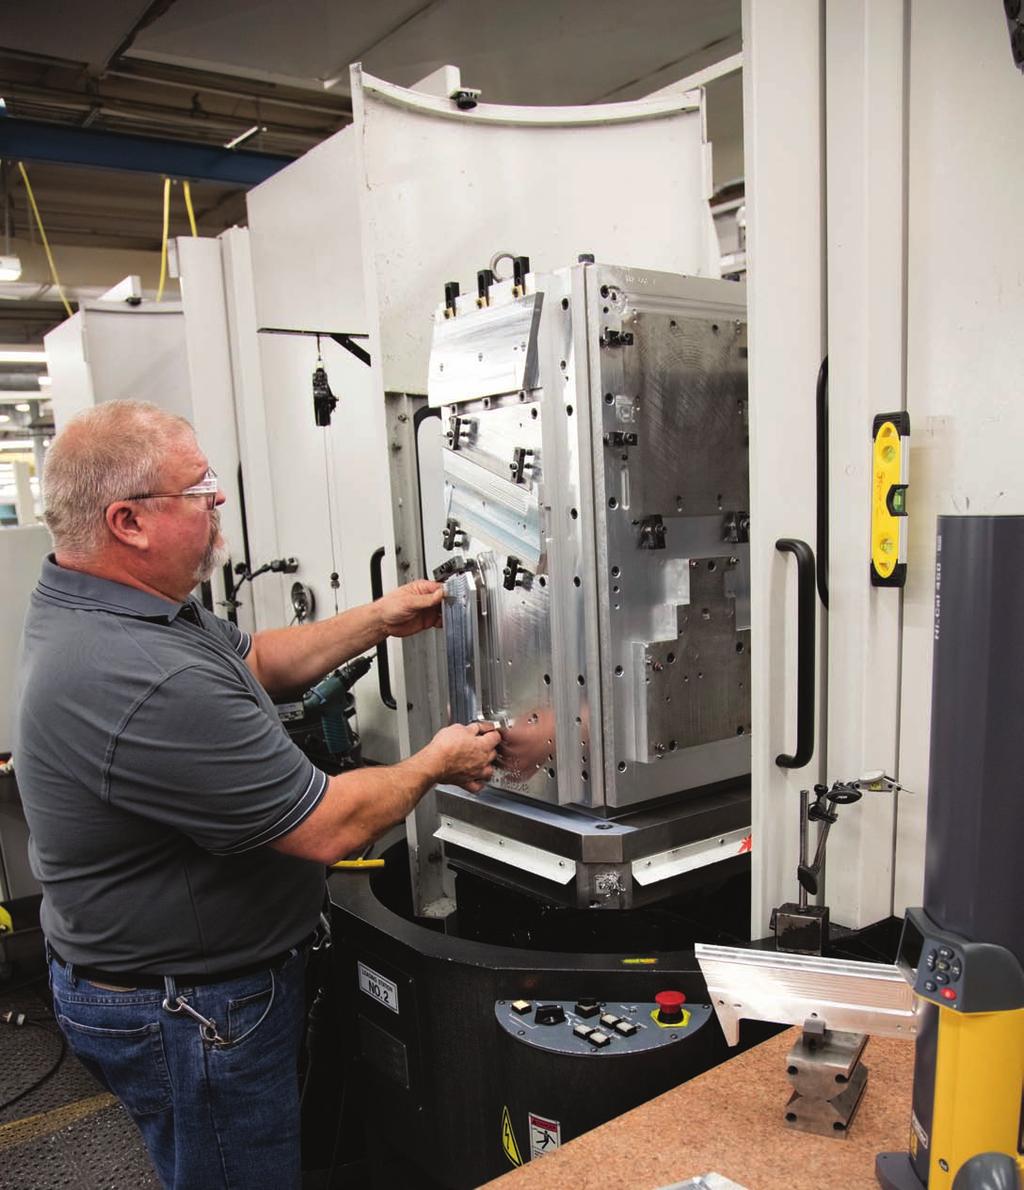 Transition Sourcing Tier ONE s first customer was from an outsourcing program, transitioning from machining and assembly of their own product to contracting it out, what we like to call Transition